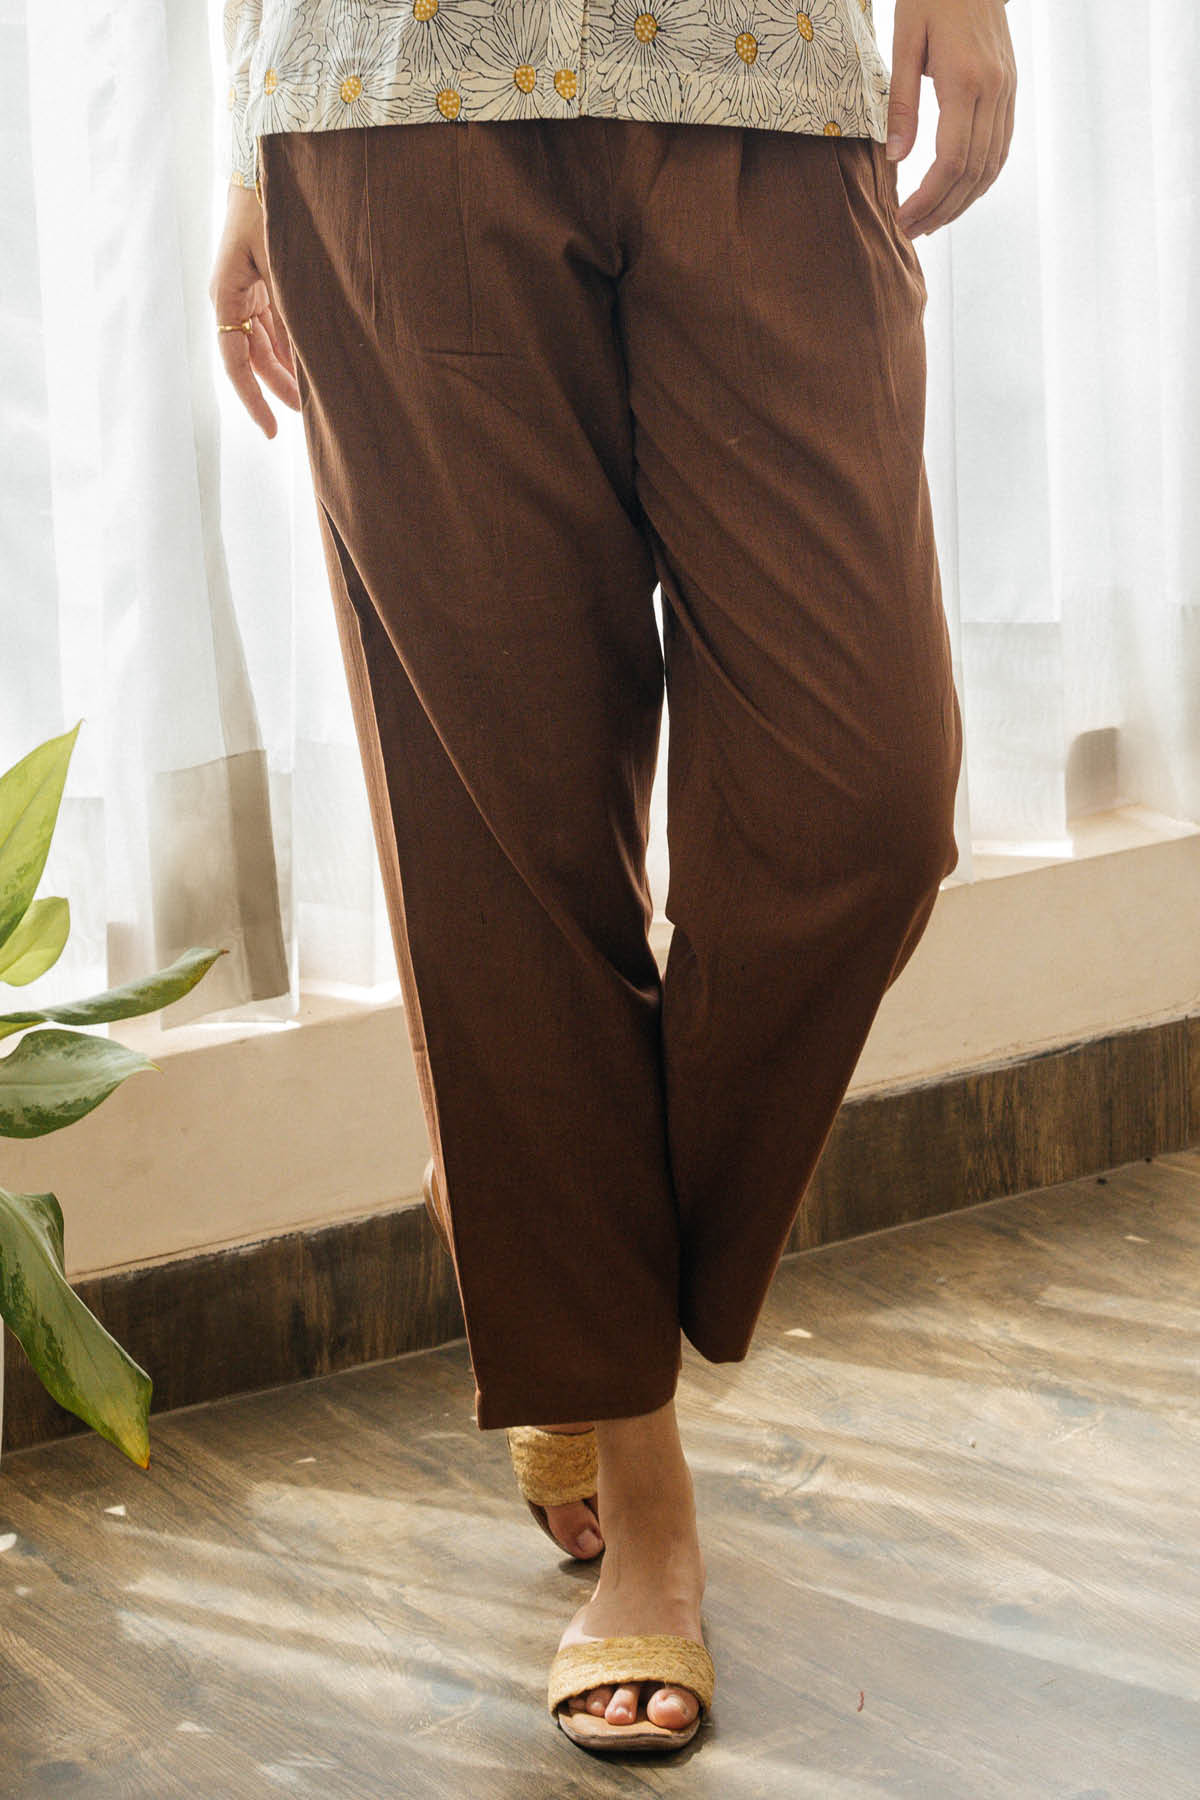 Buy Brown Pants and Trousers For Men Online at French Crown